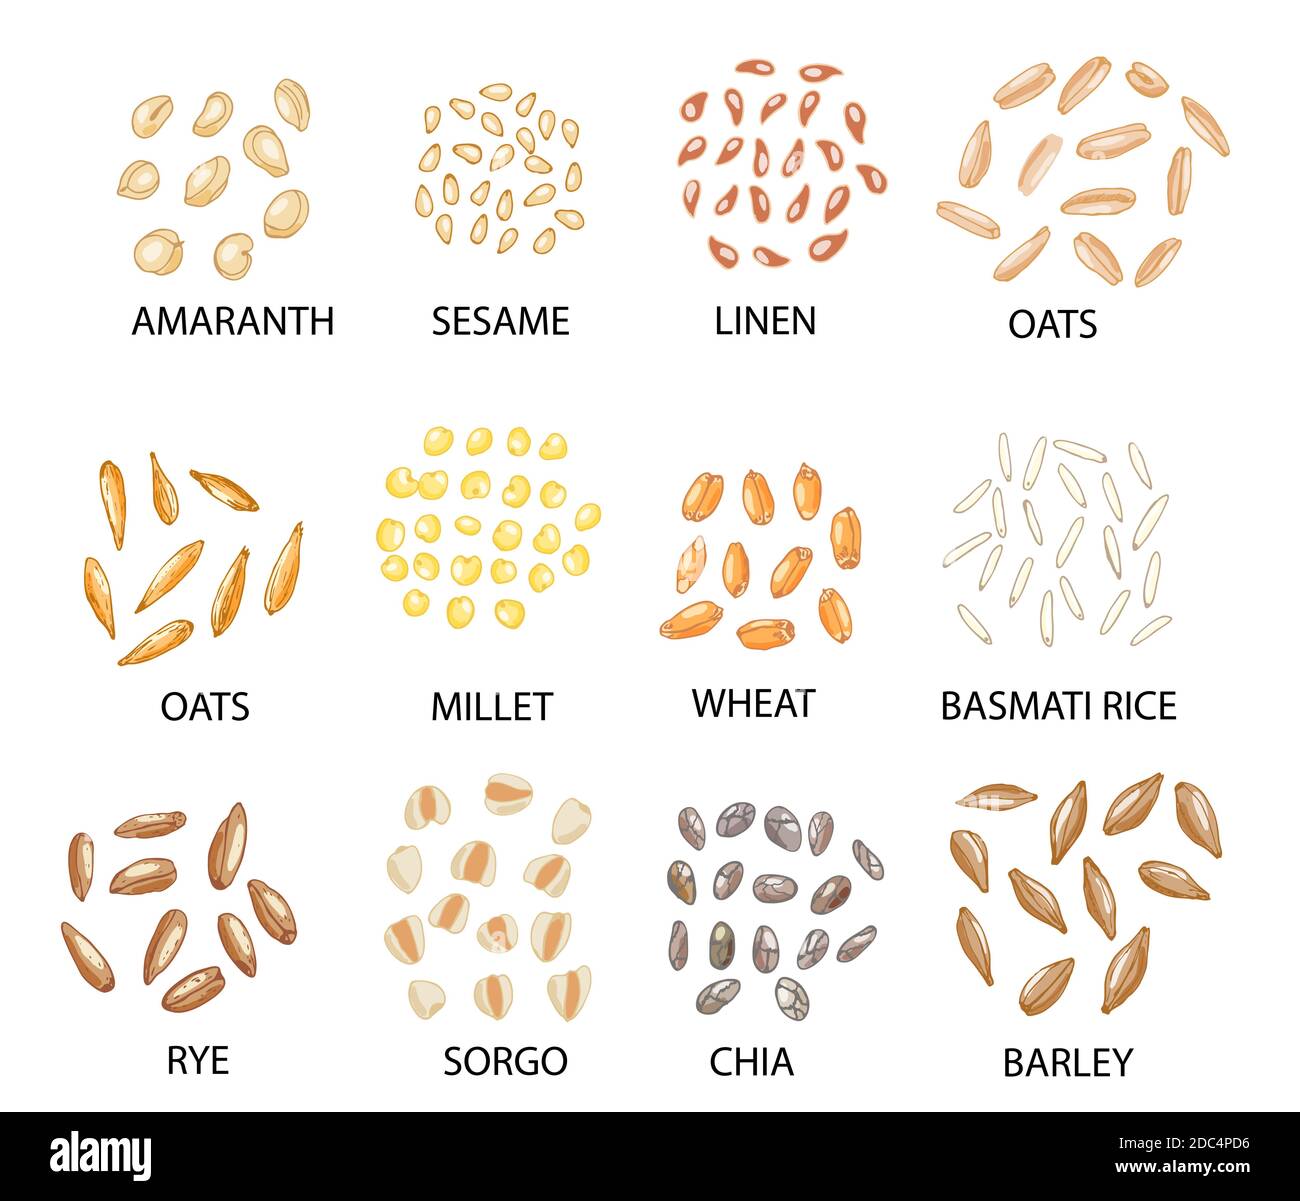 Set of hand drawn colored cereal grains isolated on white. Amaranth, sesame, linen, oats, millet, wheat, rye, sorgo, chia, barley, rice. Stylized vect Stock Vector